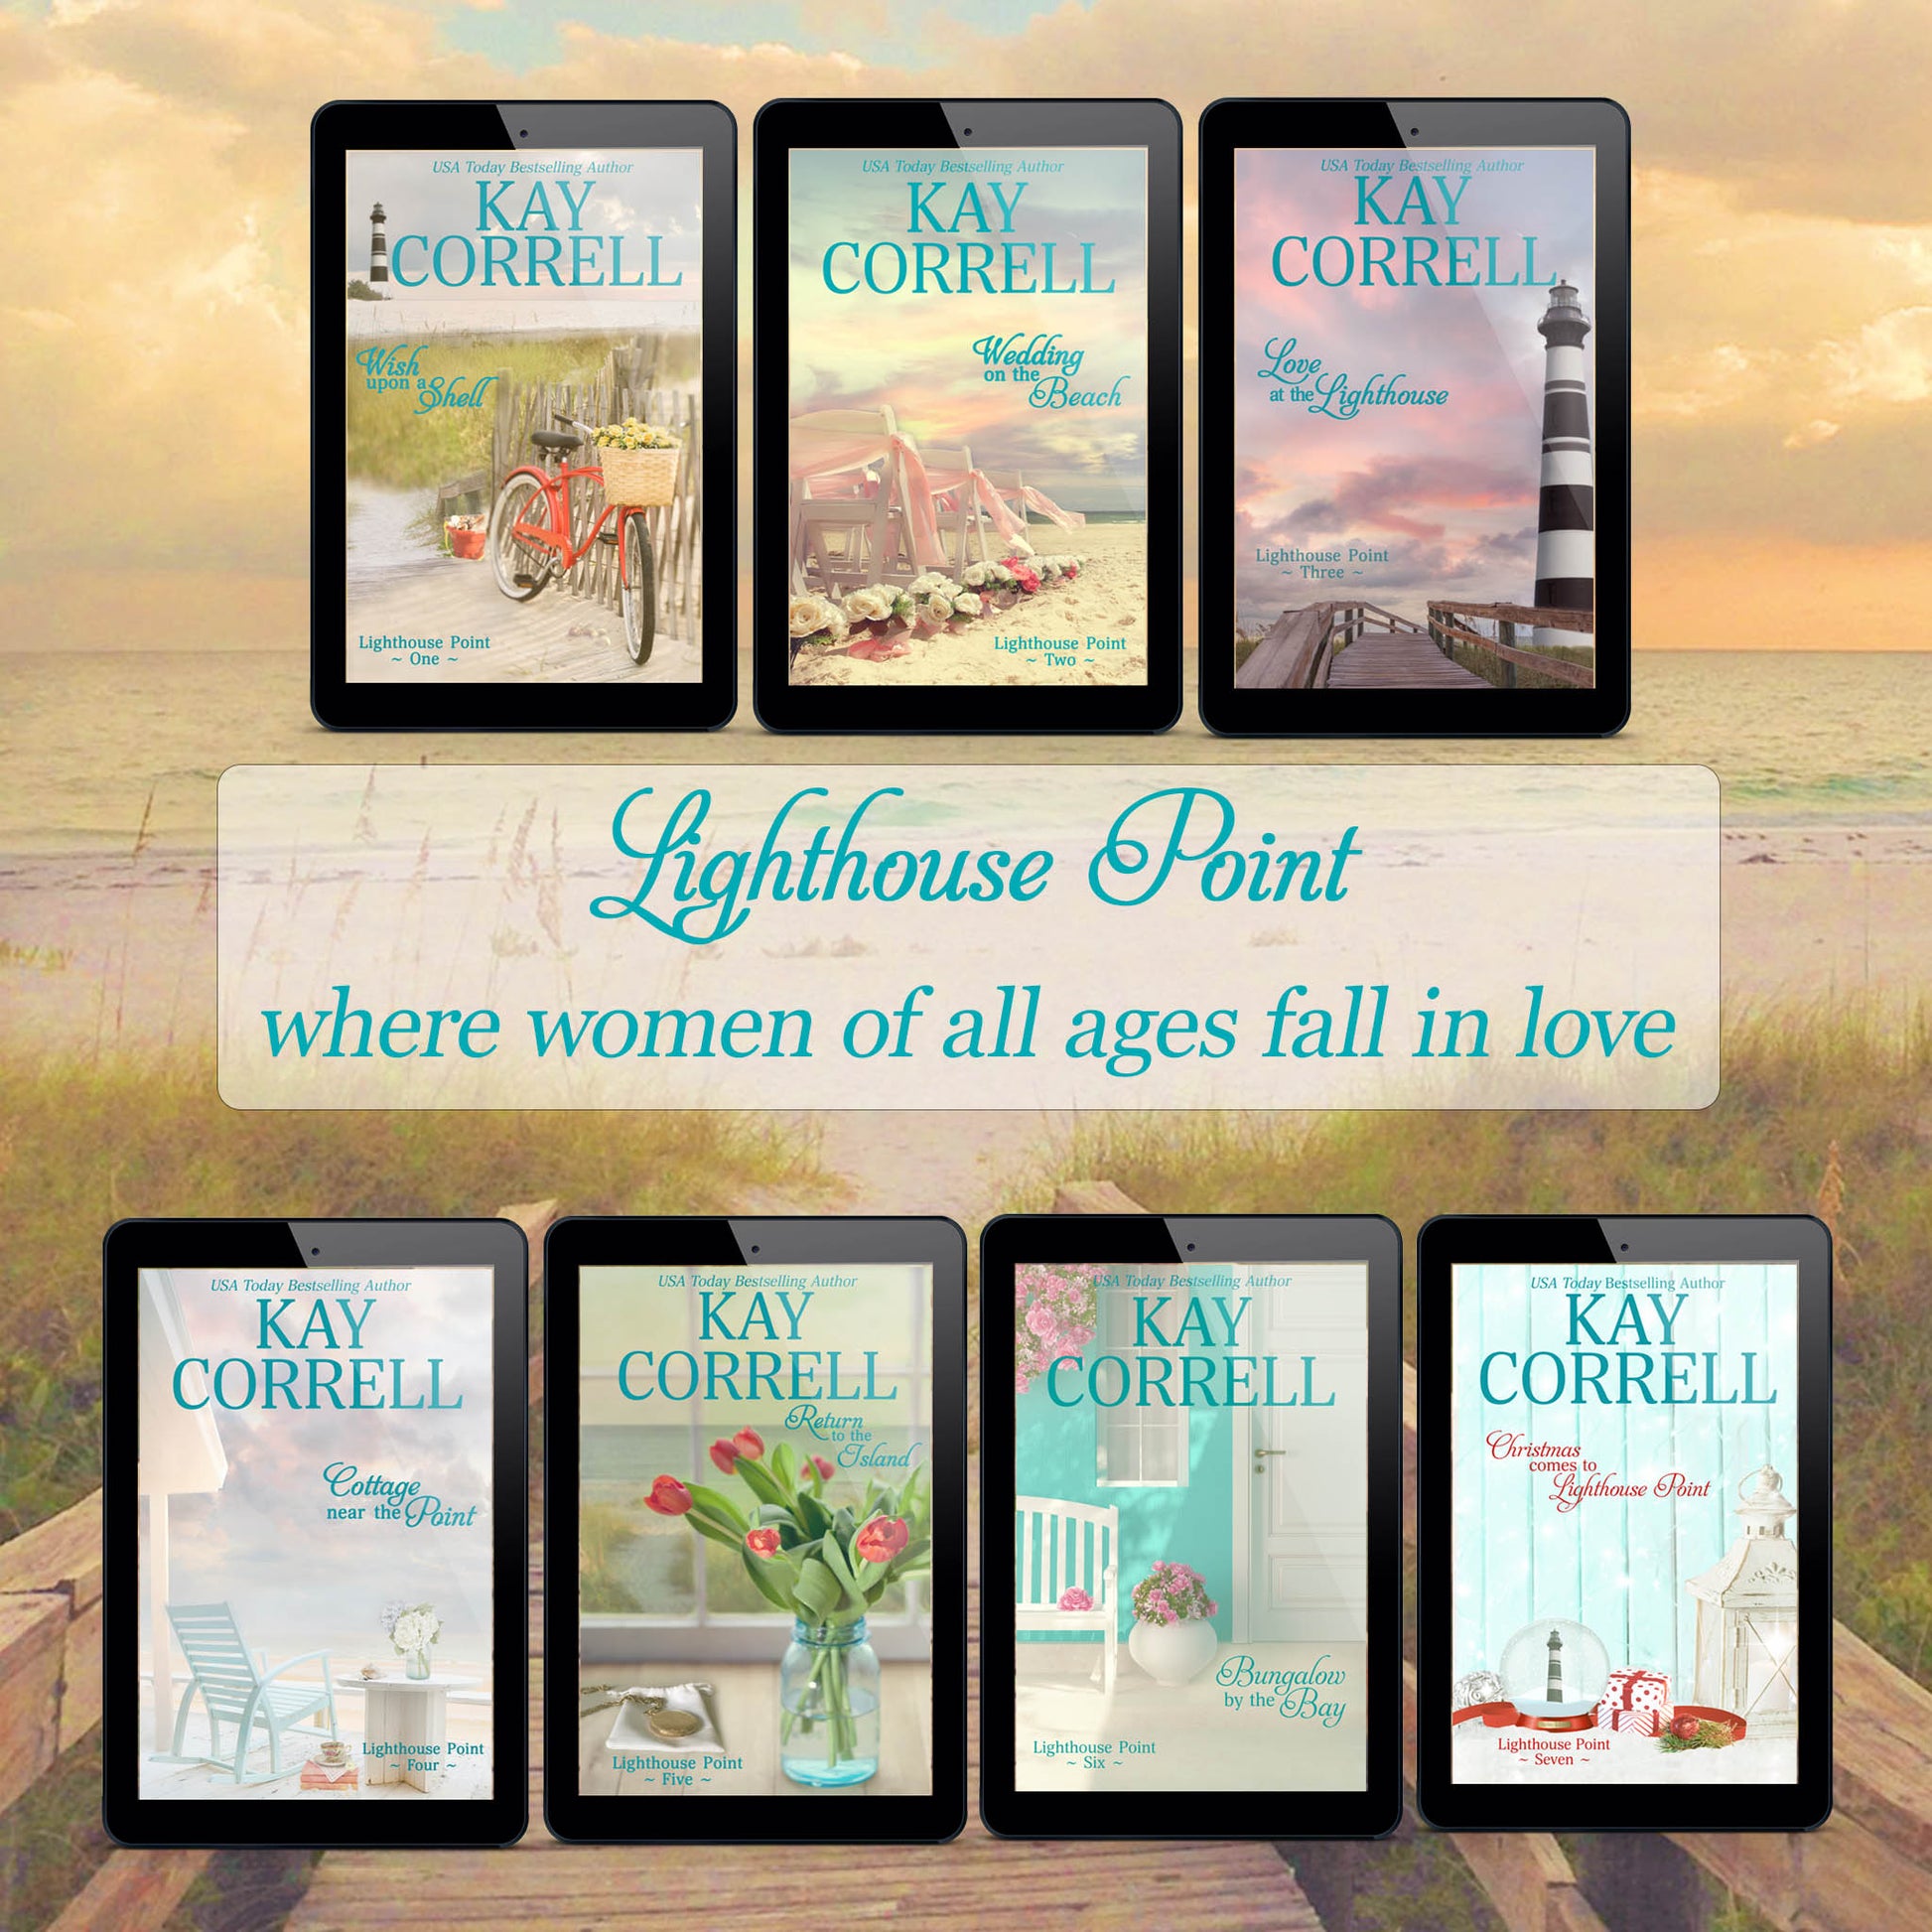 seven books in the Lighthouse Point series by USA Today bestselling author Kay Correll